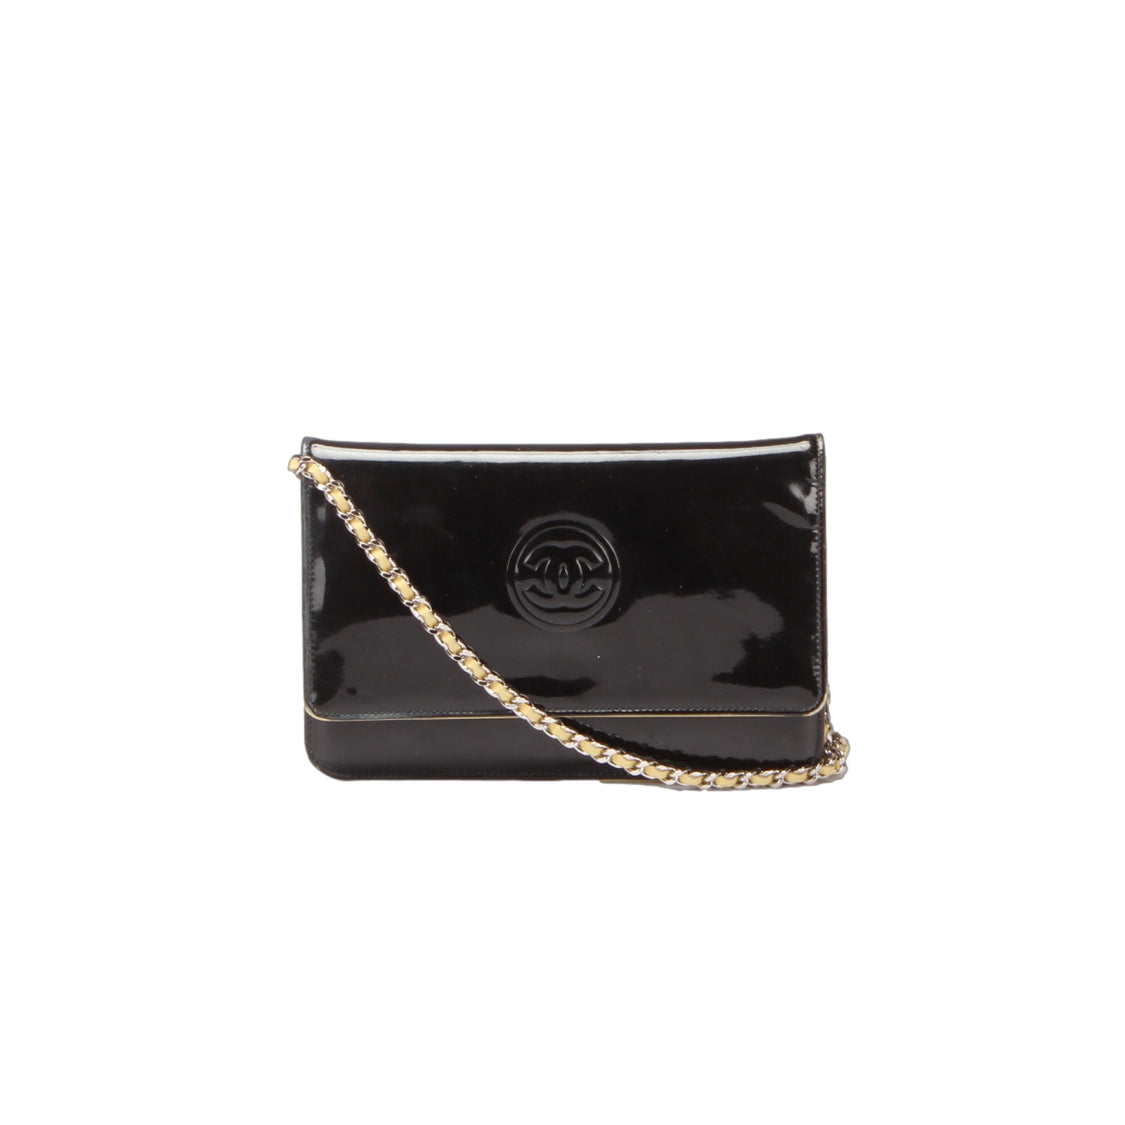 Patent Leather Chain Flap Bag